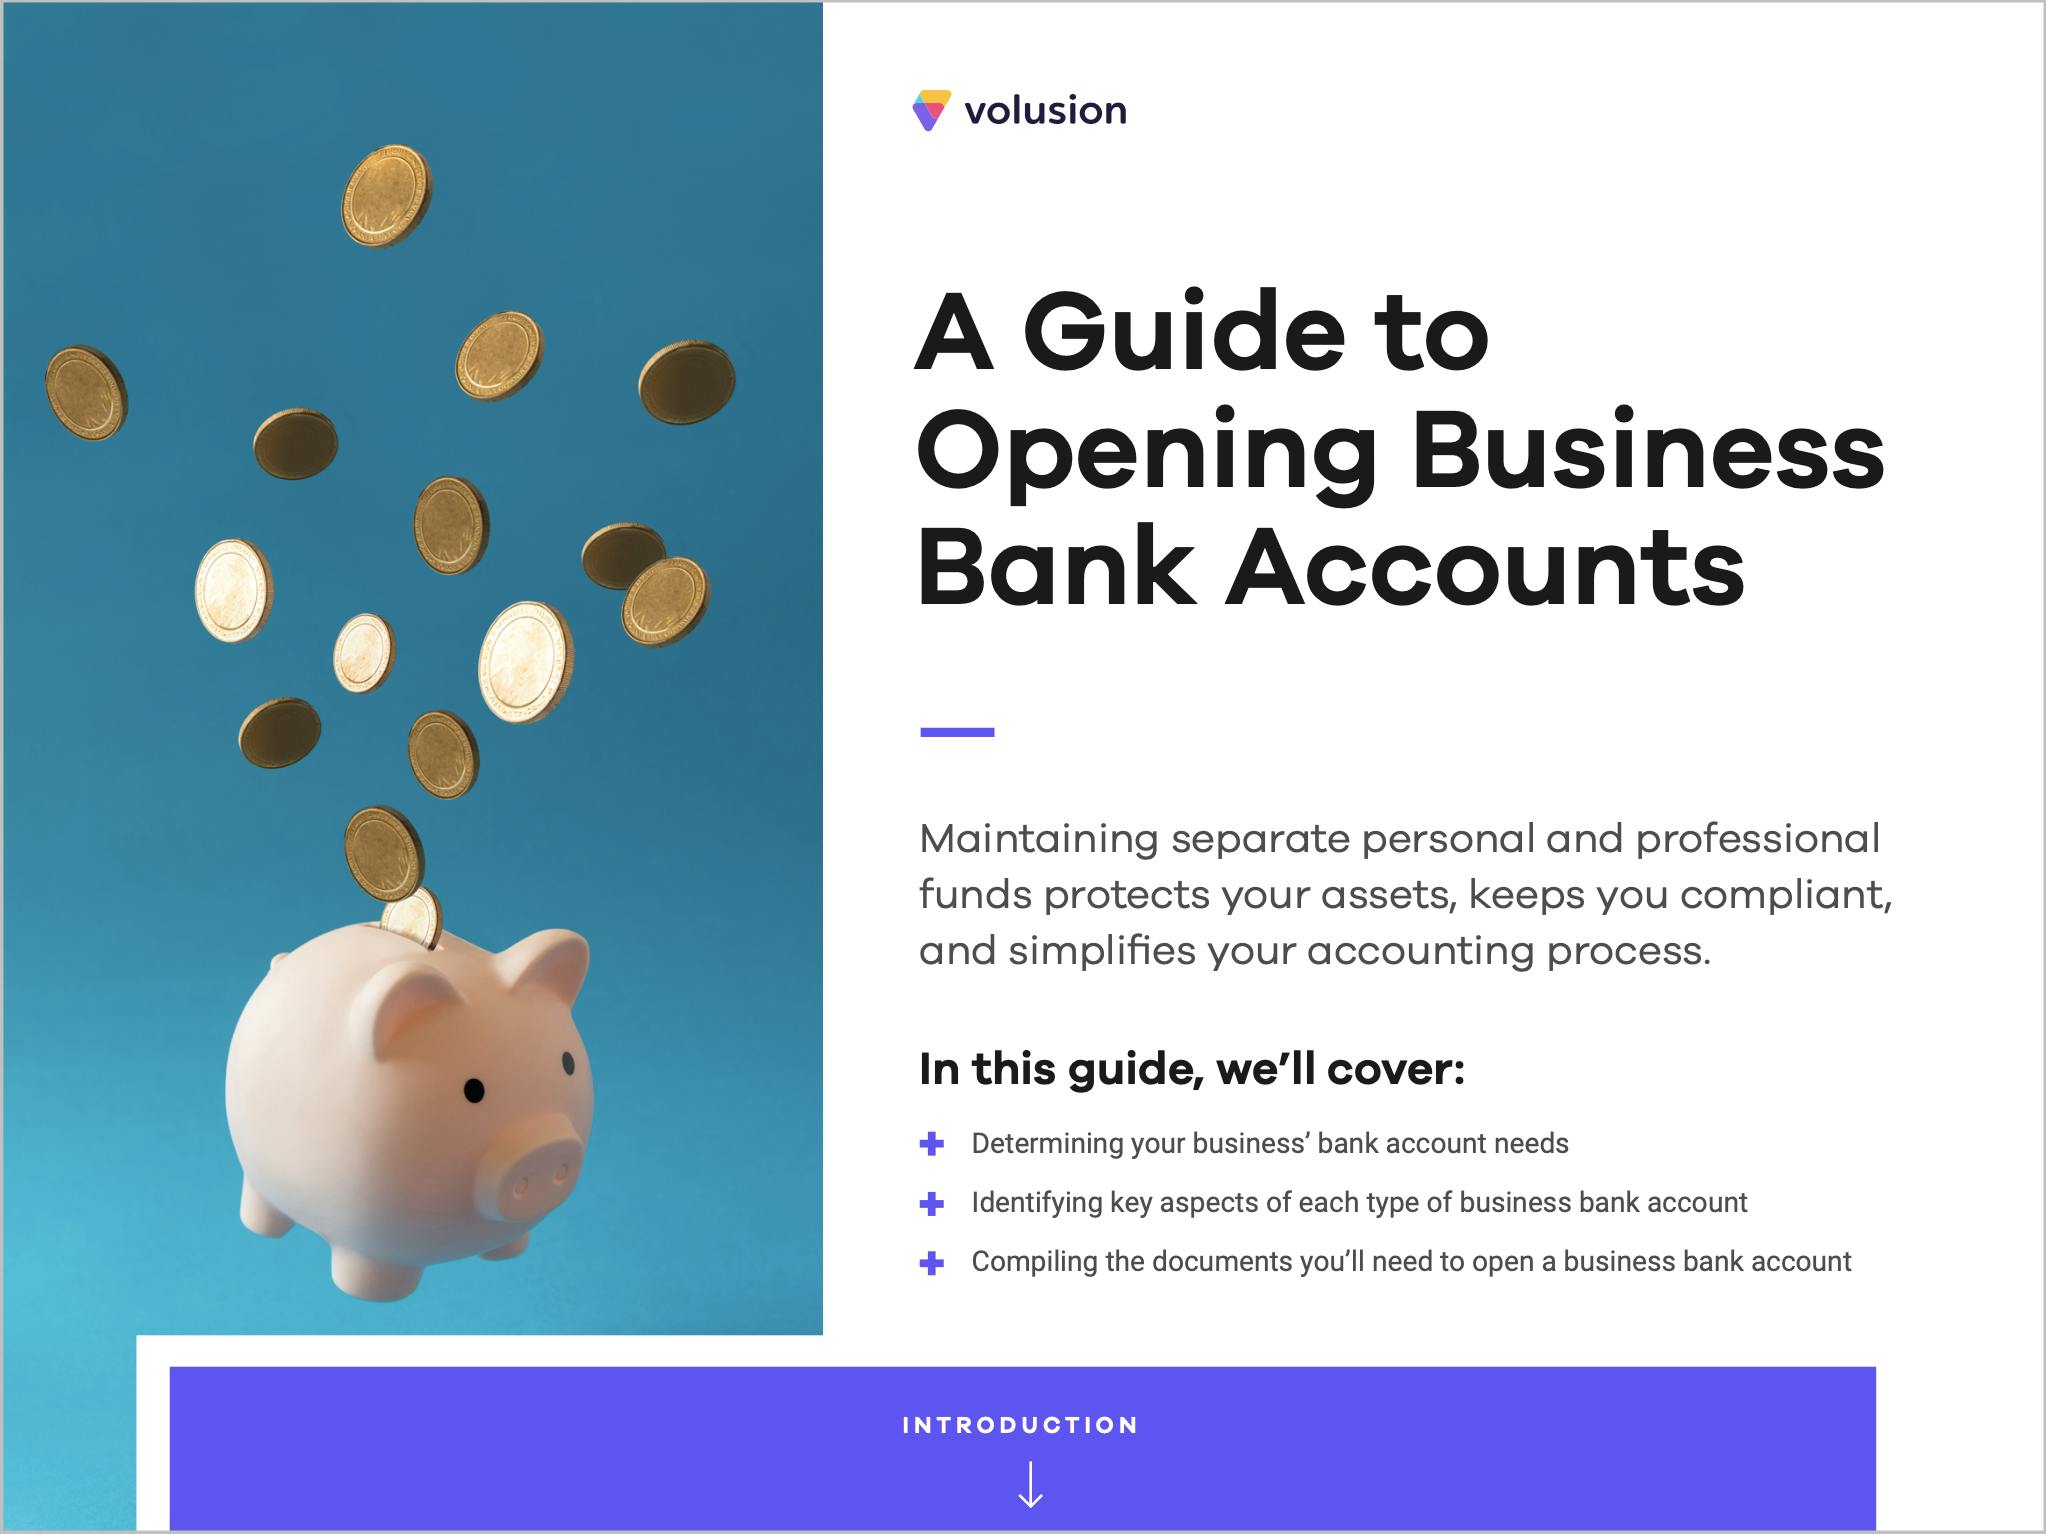 A Guide to Opening Business Bank Accounts